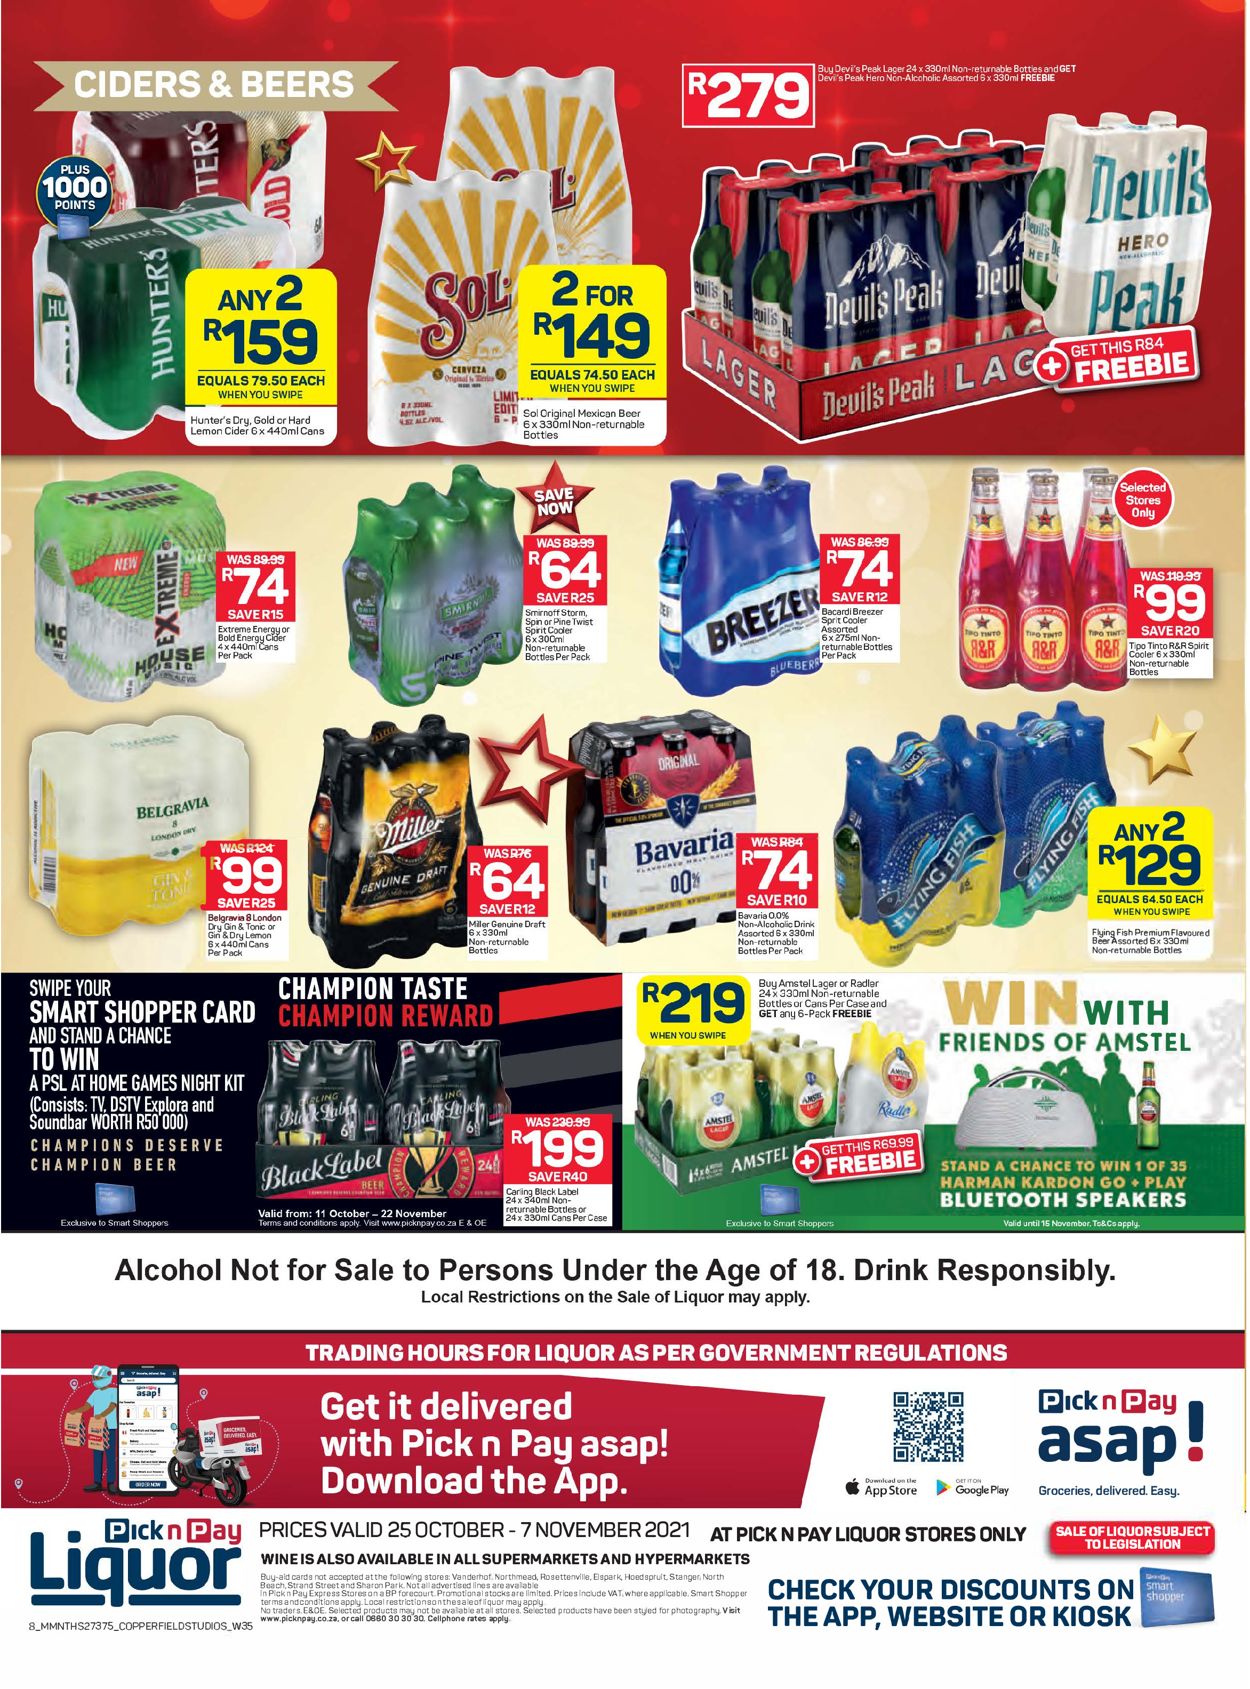 Pick n Pay Catalogue - 2021/10/25-2021/11/07 (Page 8)